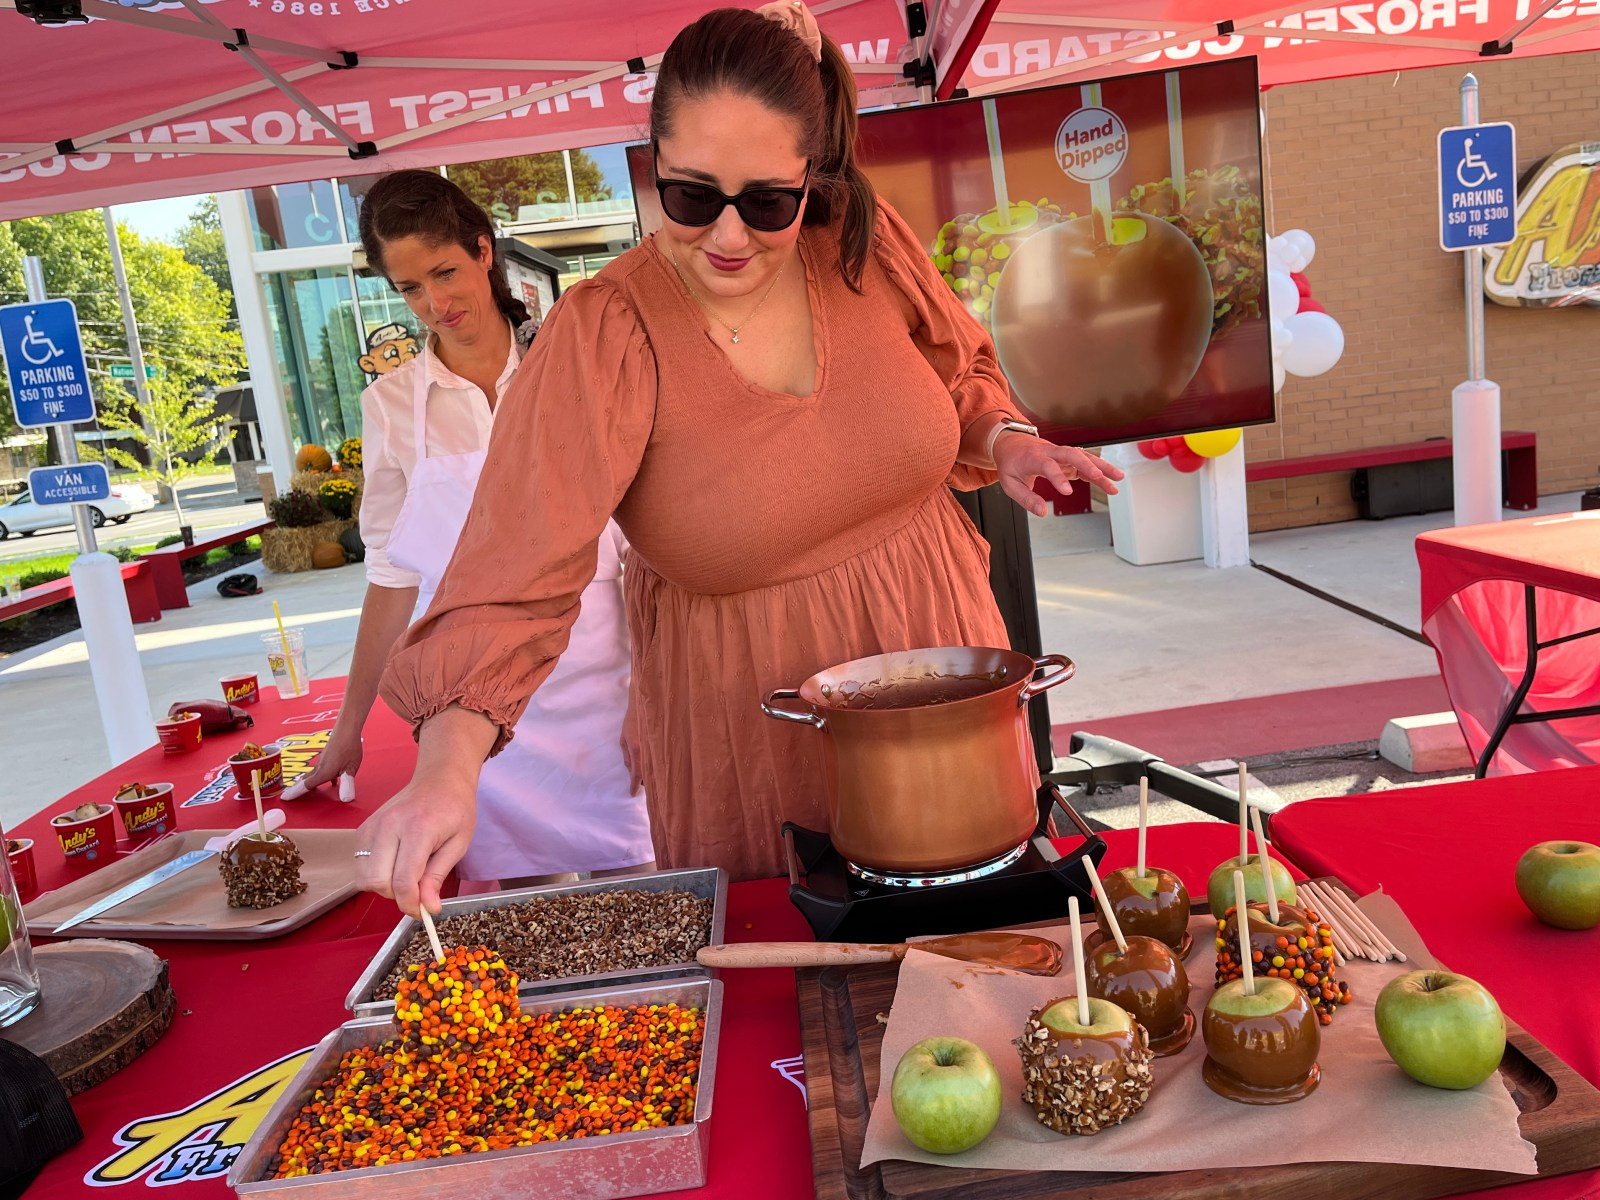 A woman rolls a caramel apple in a dish of Reese's Pieces